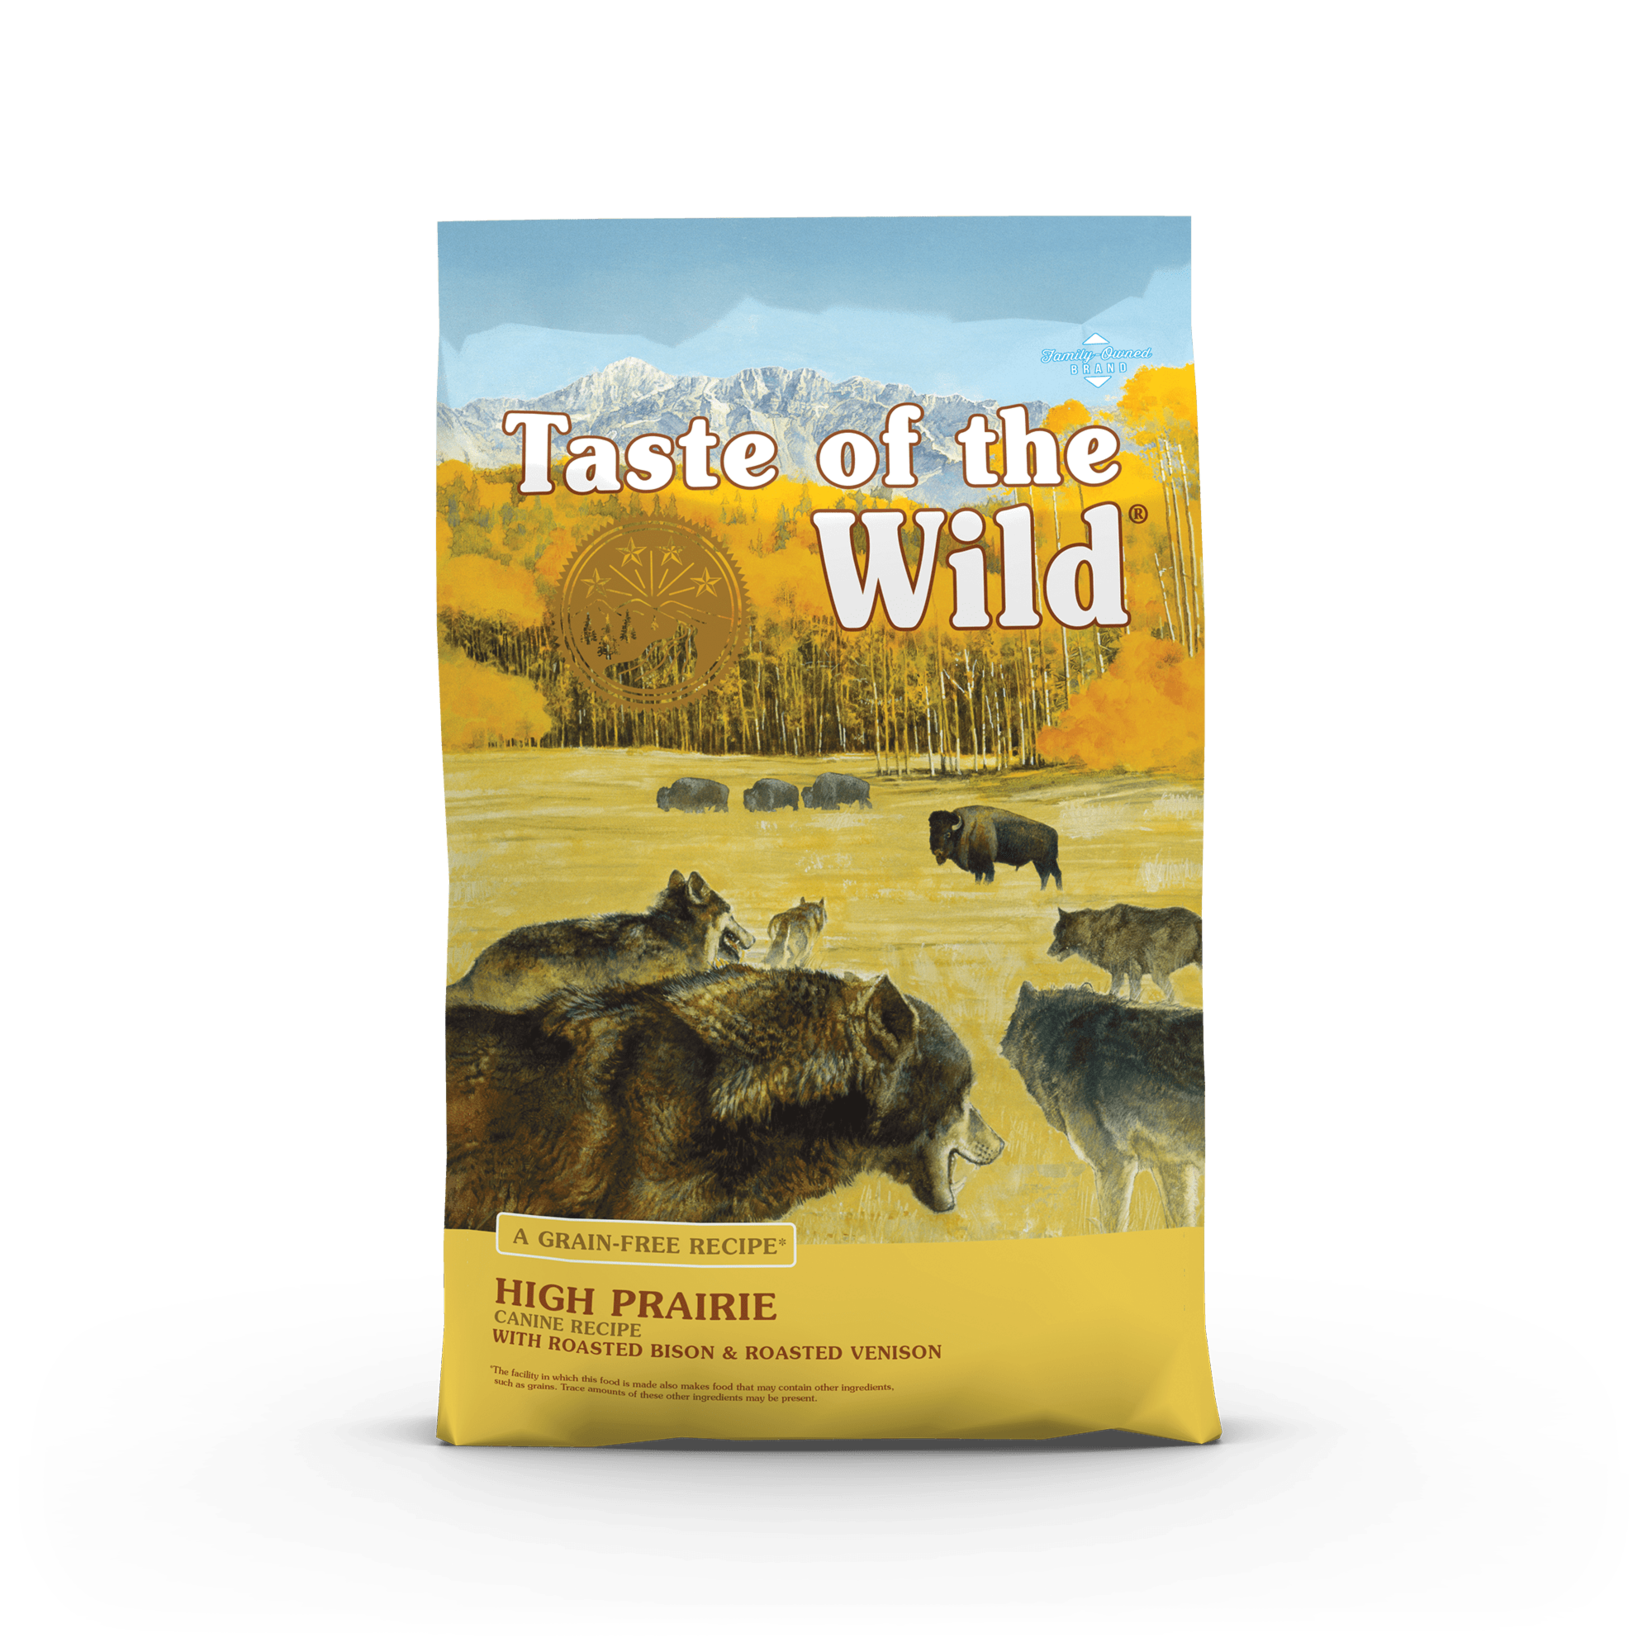 Taste of the Wild Taste of the Wild Dry Dog Food High Prairie Recipe with Roasted Bison & Venison Grain Free